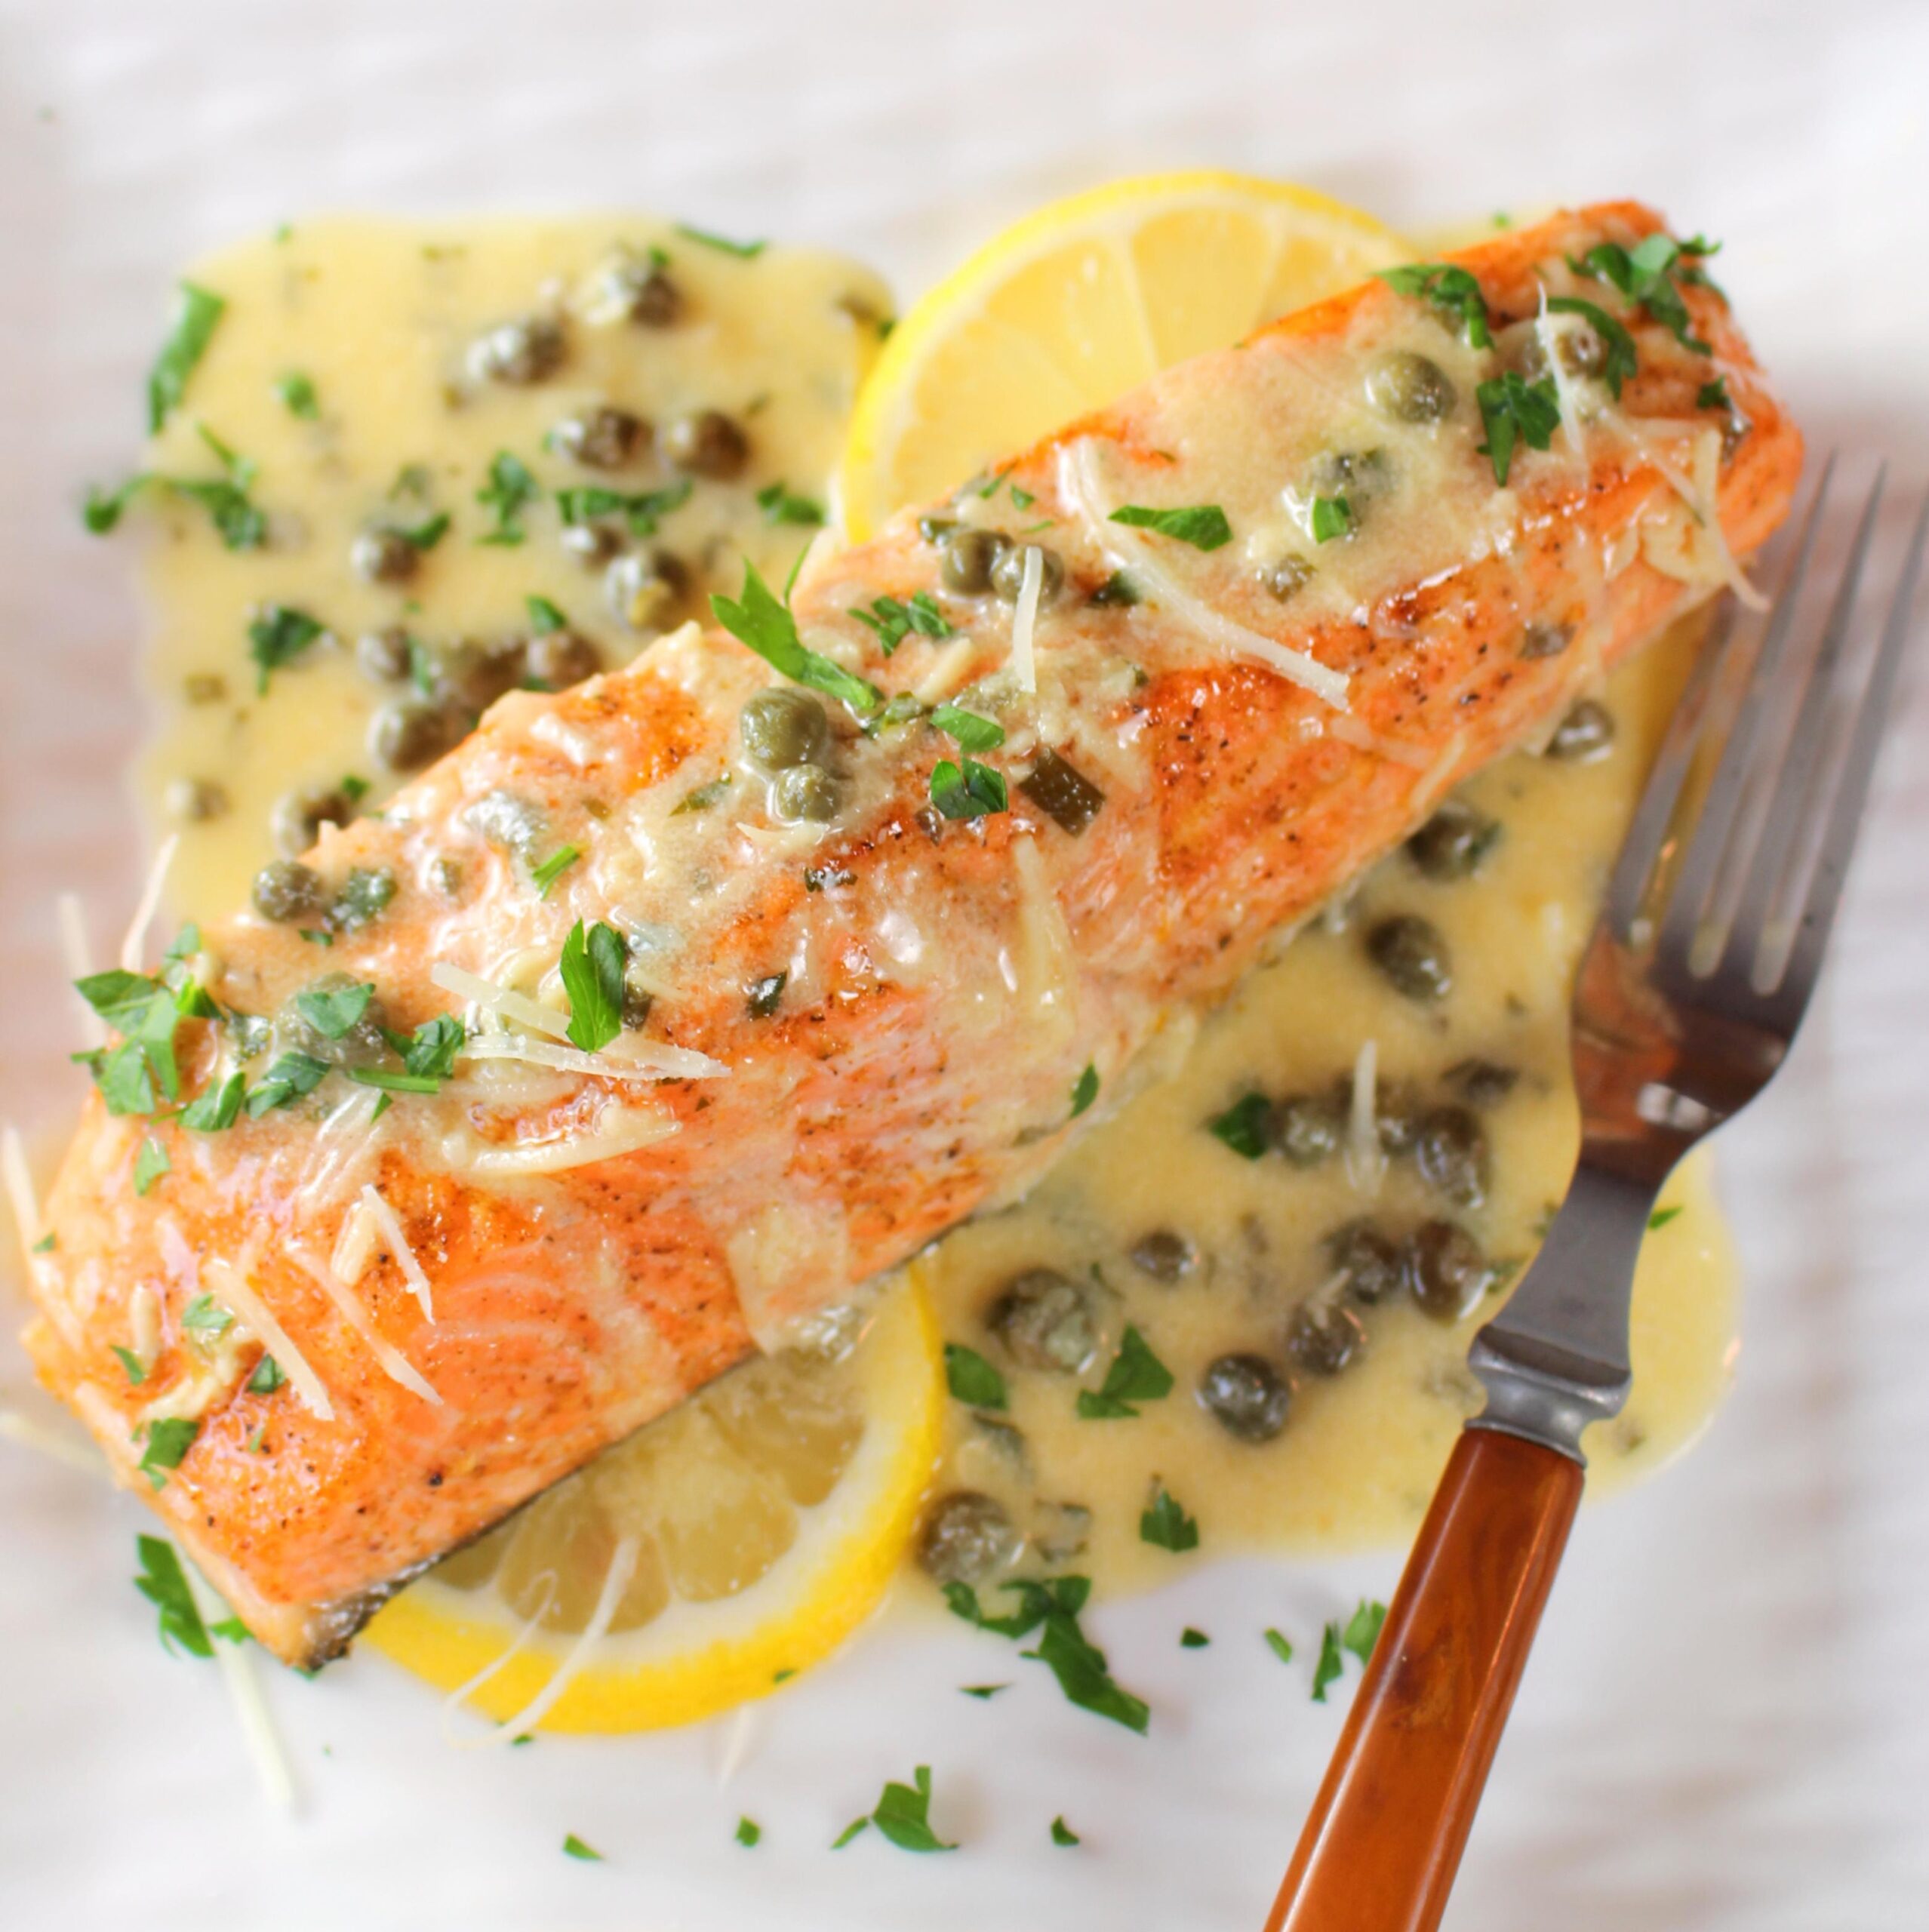  Cooking up a storm with this flavor-packed salmon fillet and delicious butter sauce